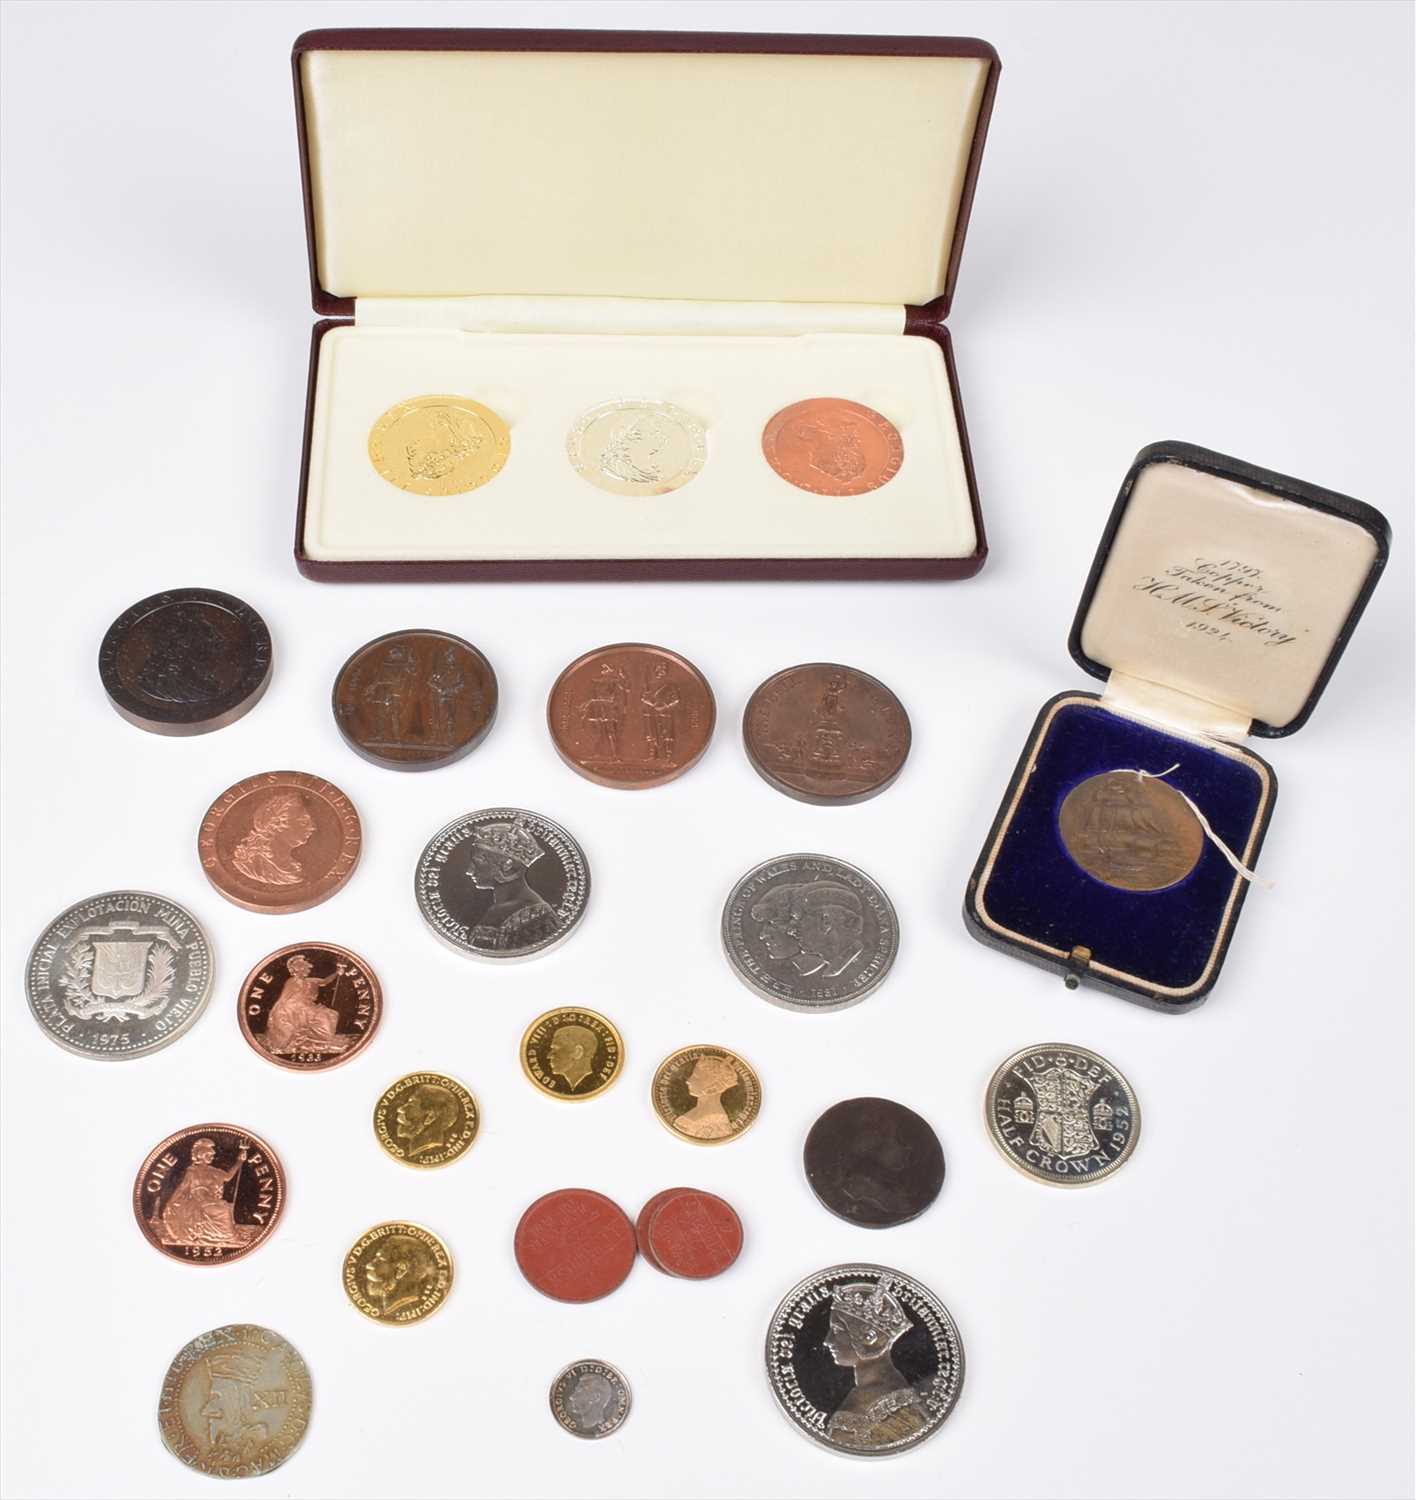 Lot 29 - Coins, re-strikes and fantasies (17) including fake sovereigns, shooting medals and tokens.